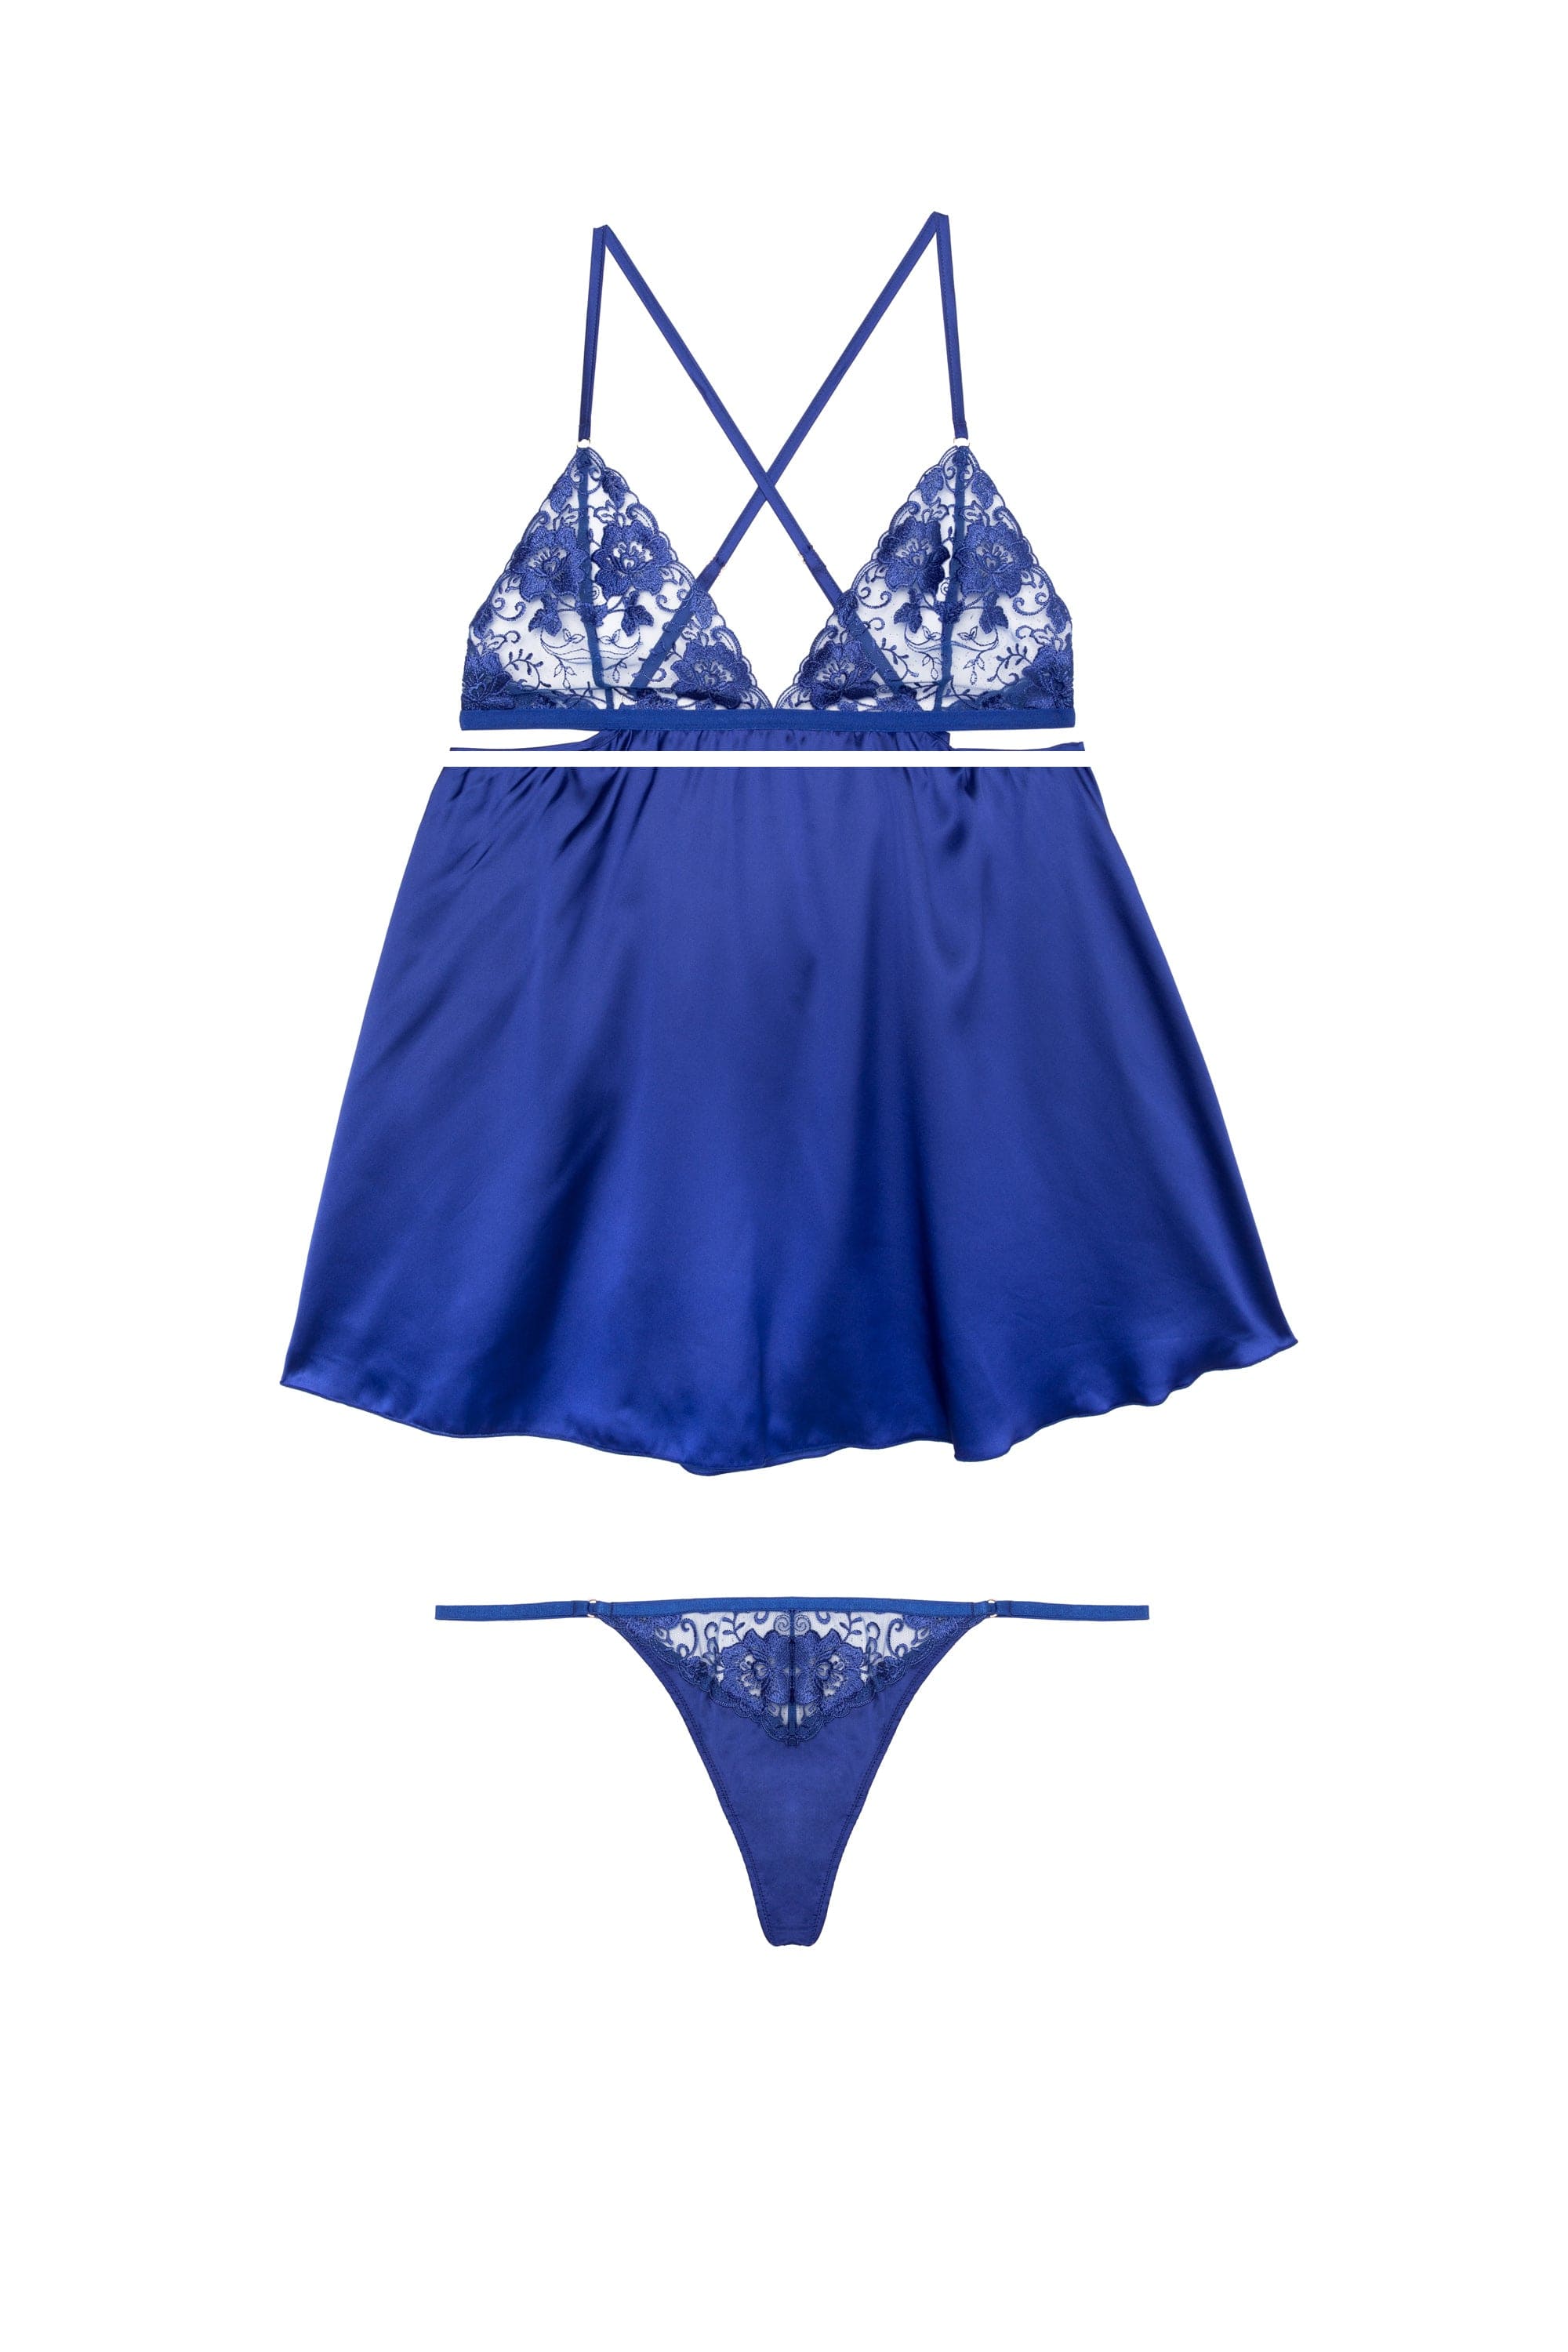 Lola Electric Blue Satin Babydoll and Thong Set – Playful Promises